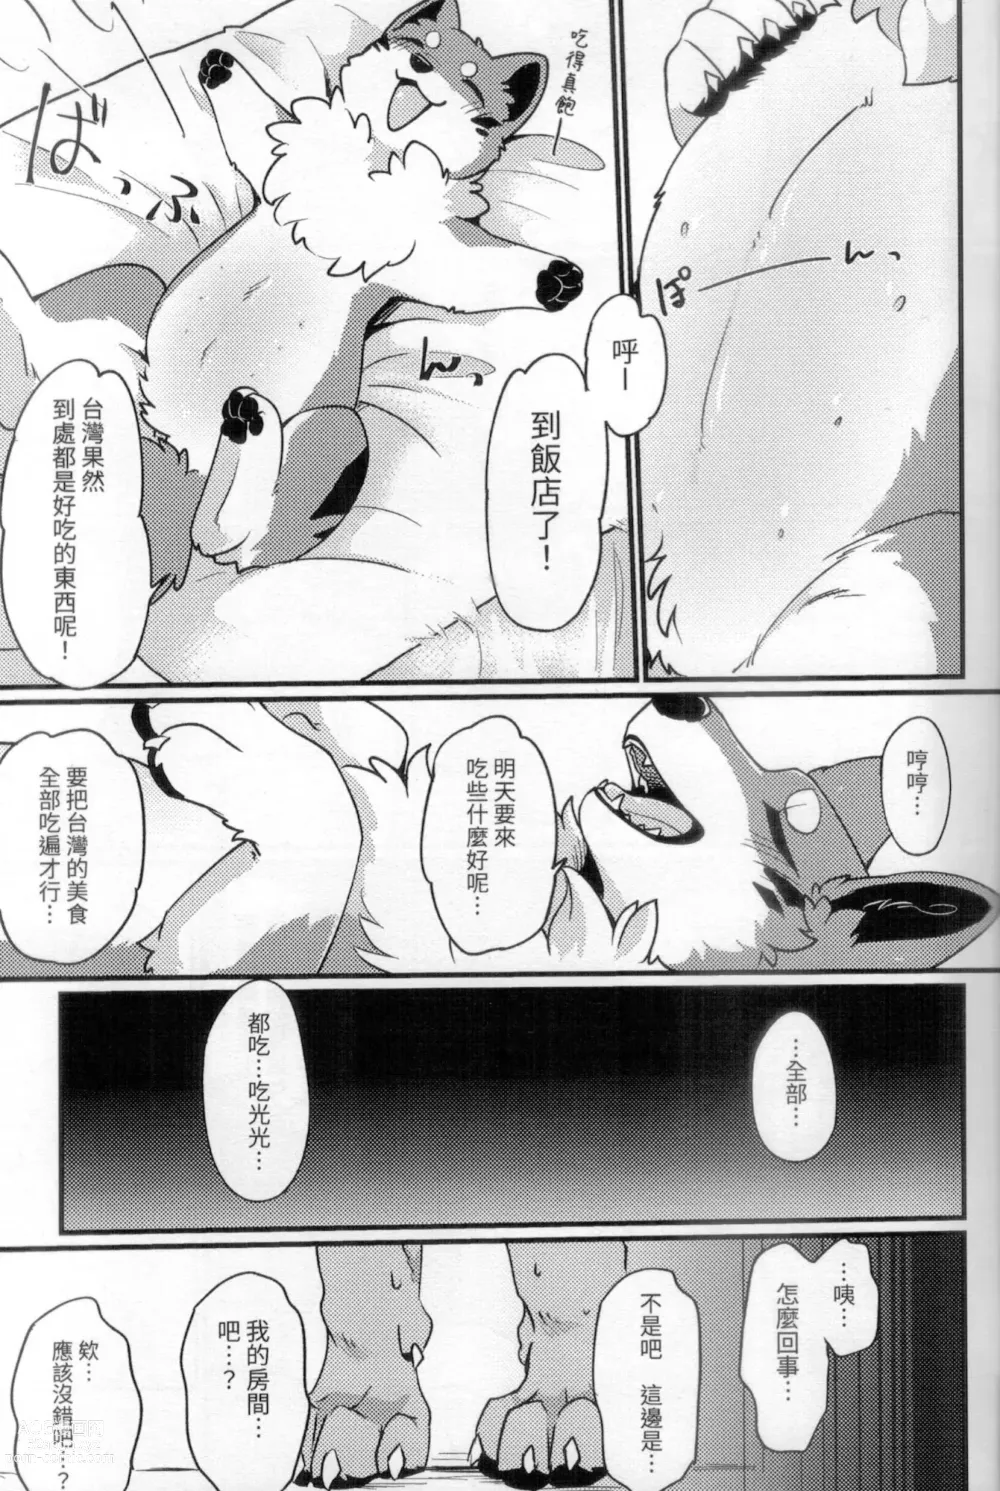 Page 6 of doujinshi 狐犬台灣美食旅